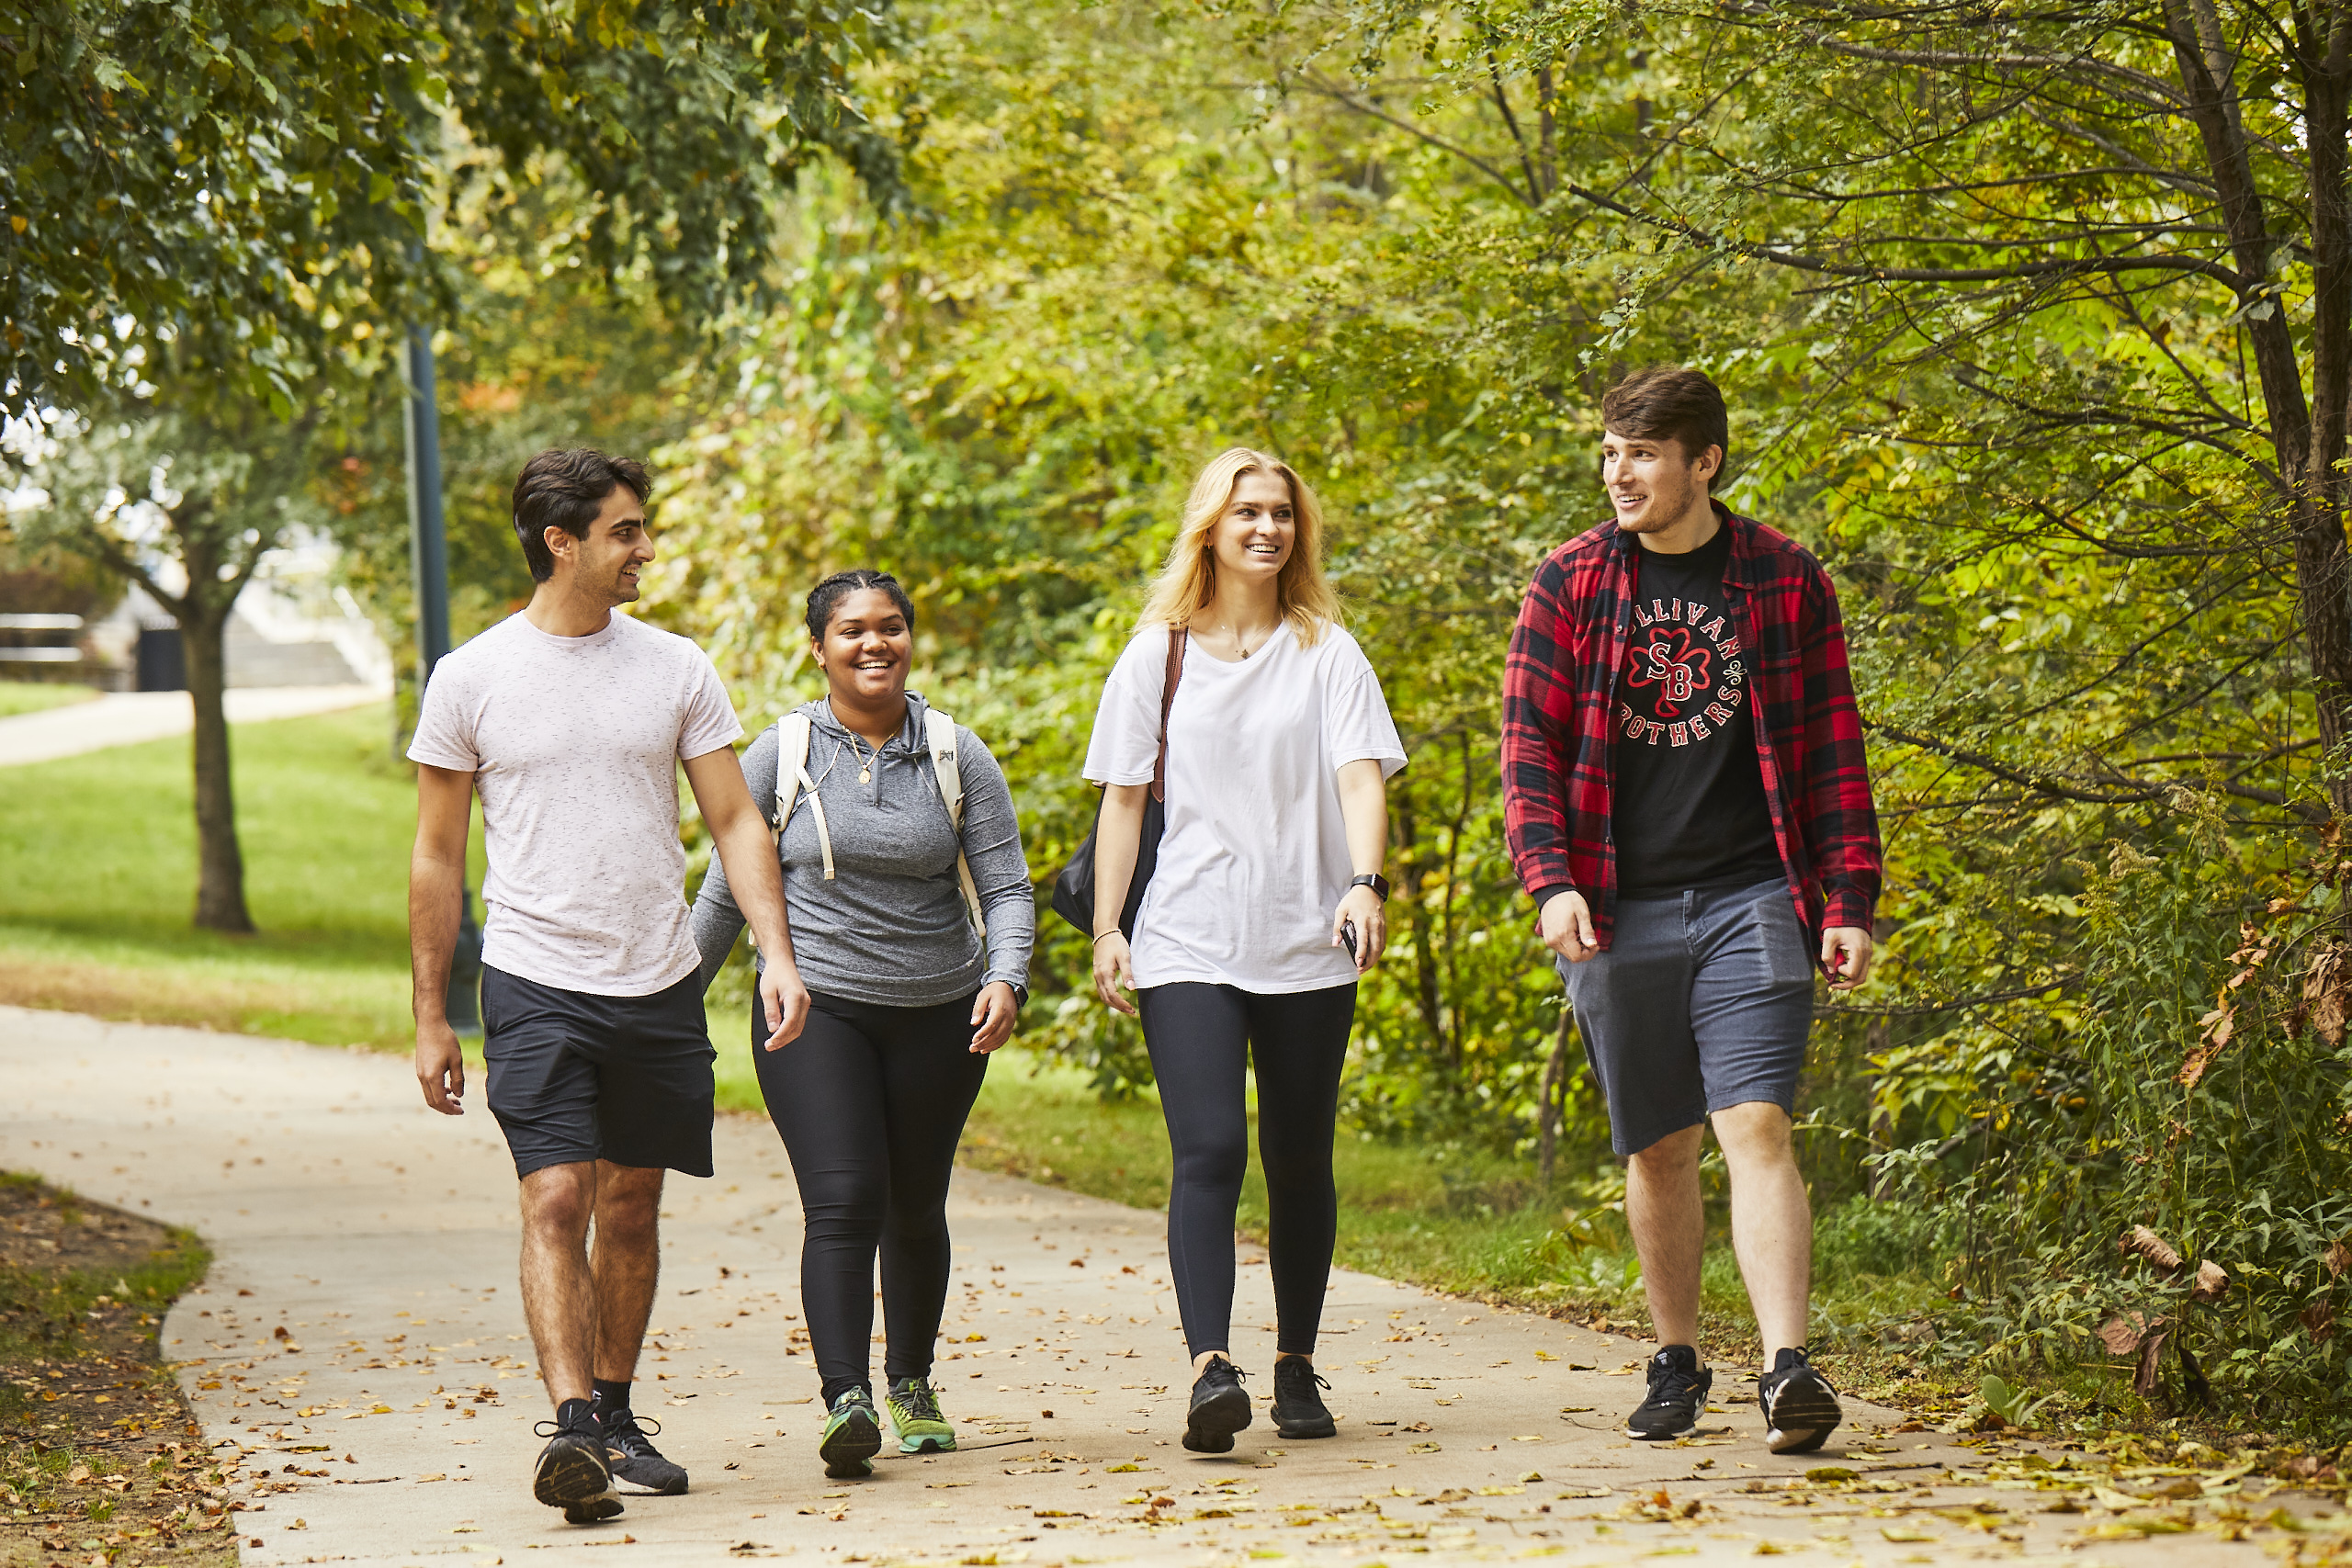 Four UMass Lowell students (2 male and 2 female) smiling and walking down a wooded path on campus.